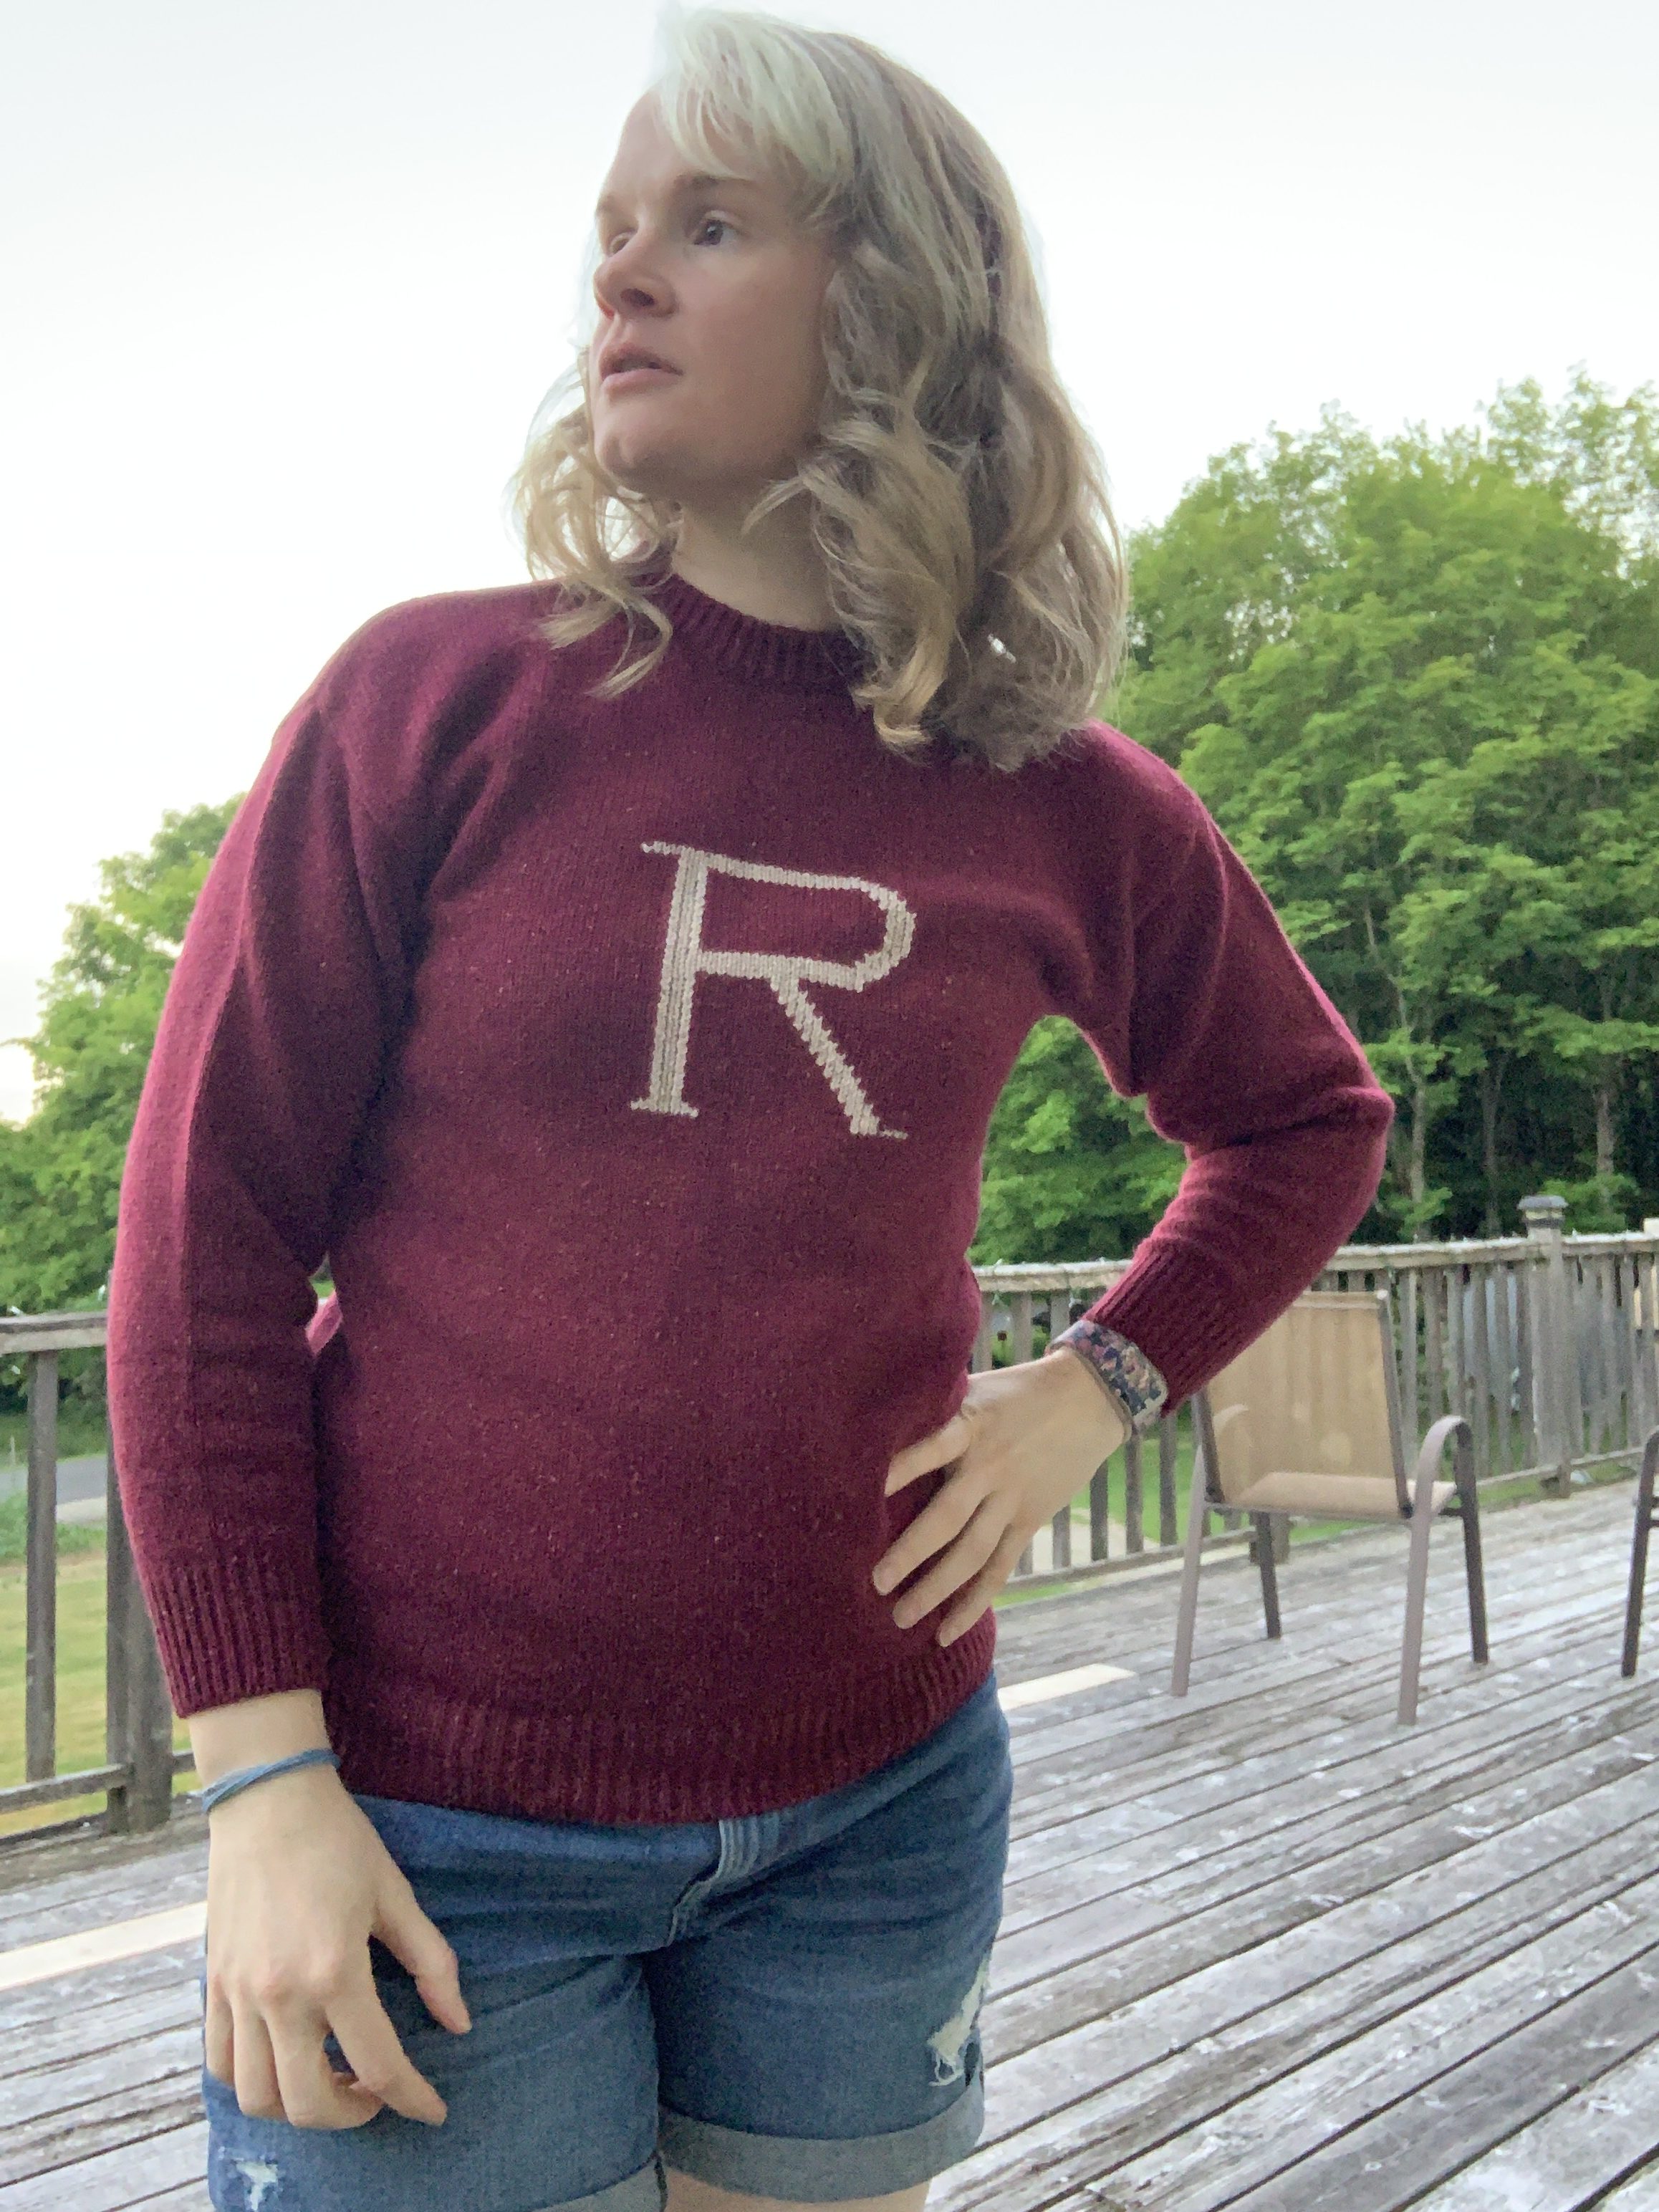 Full frontal view of the maroon “R” sweater being worn